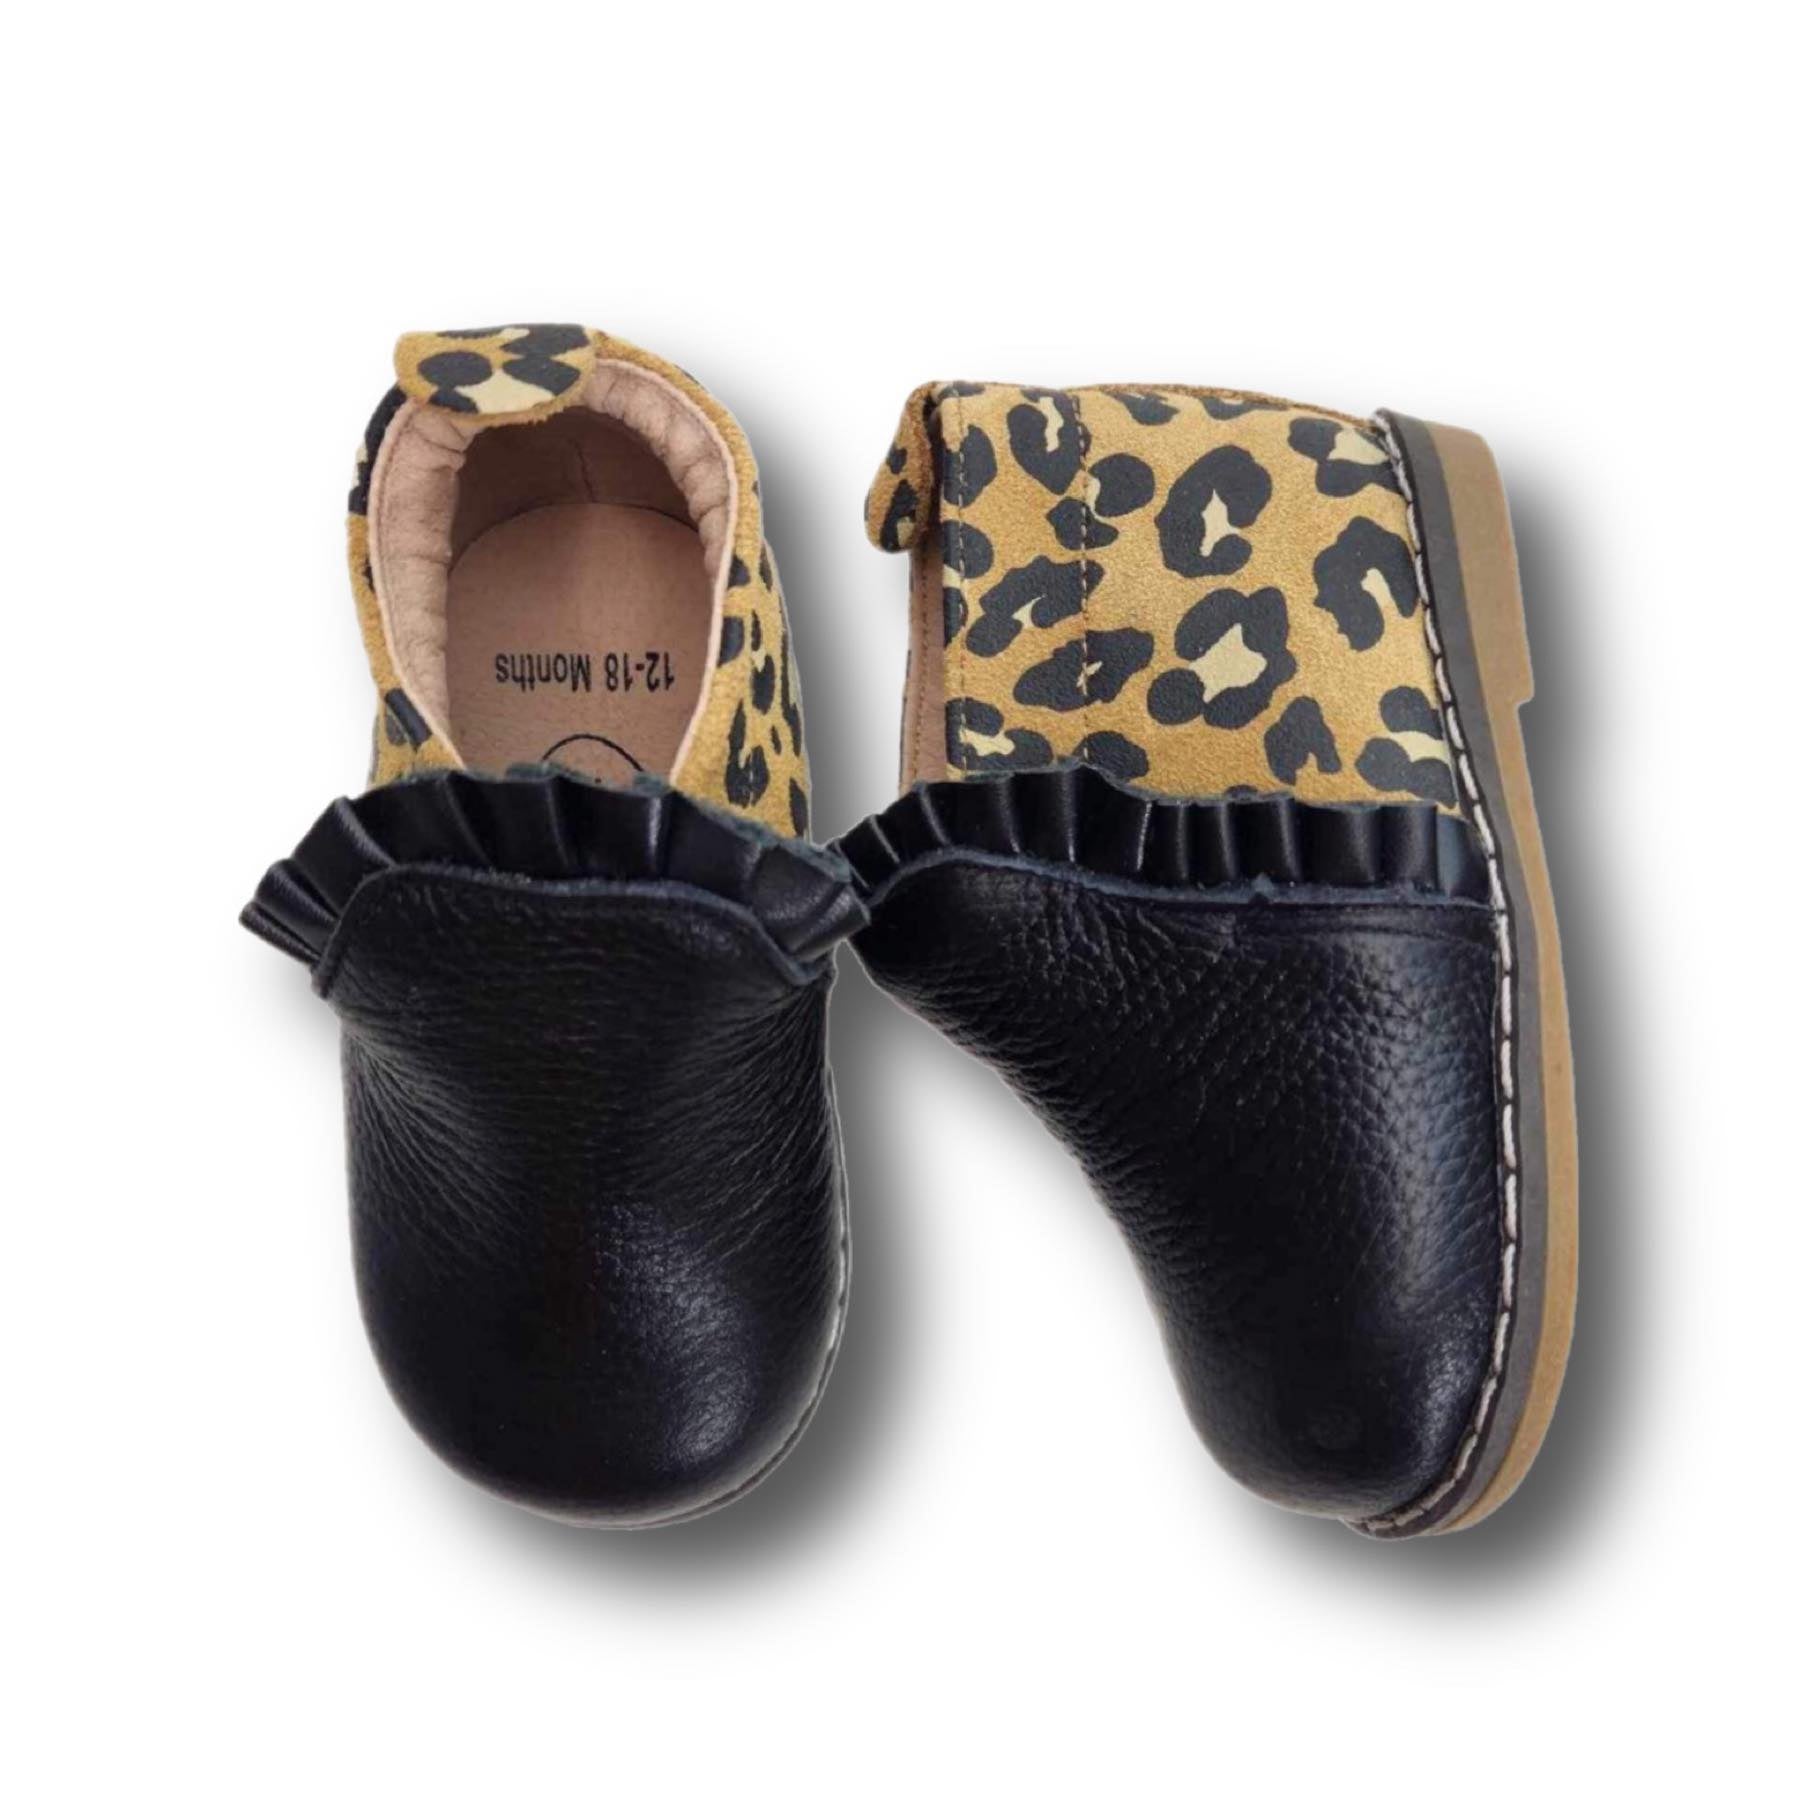 Adult Boot in Animal Print and Black Leather